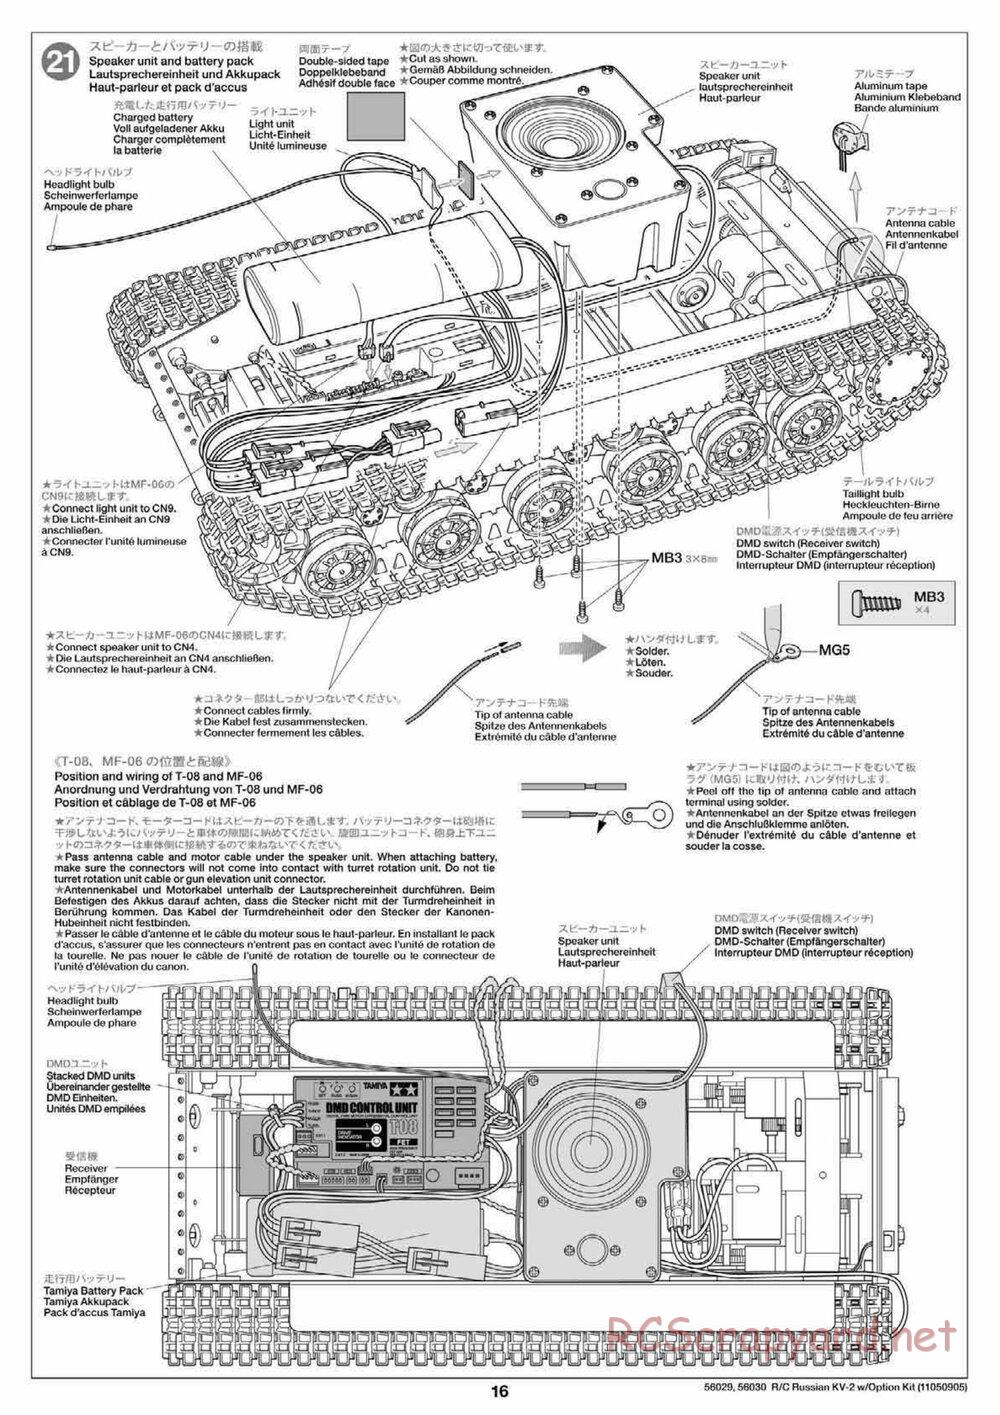 Tamiya - Russian Heavy Tank KV-2 Gigant - 1/16 Scale Chassis - Manual - Page 16